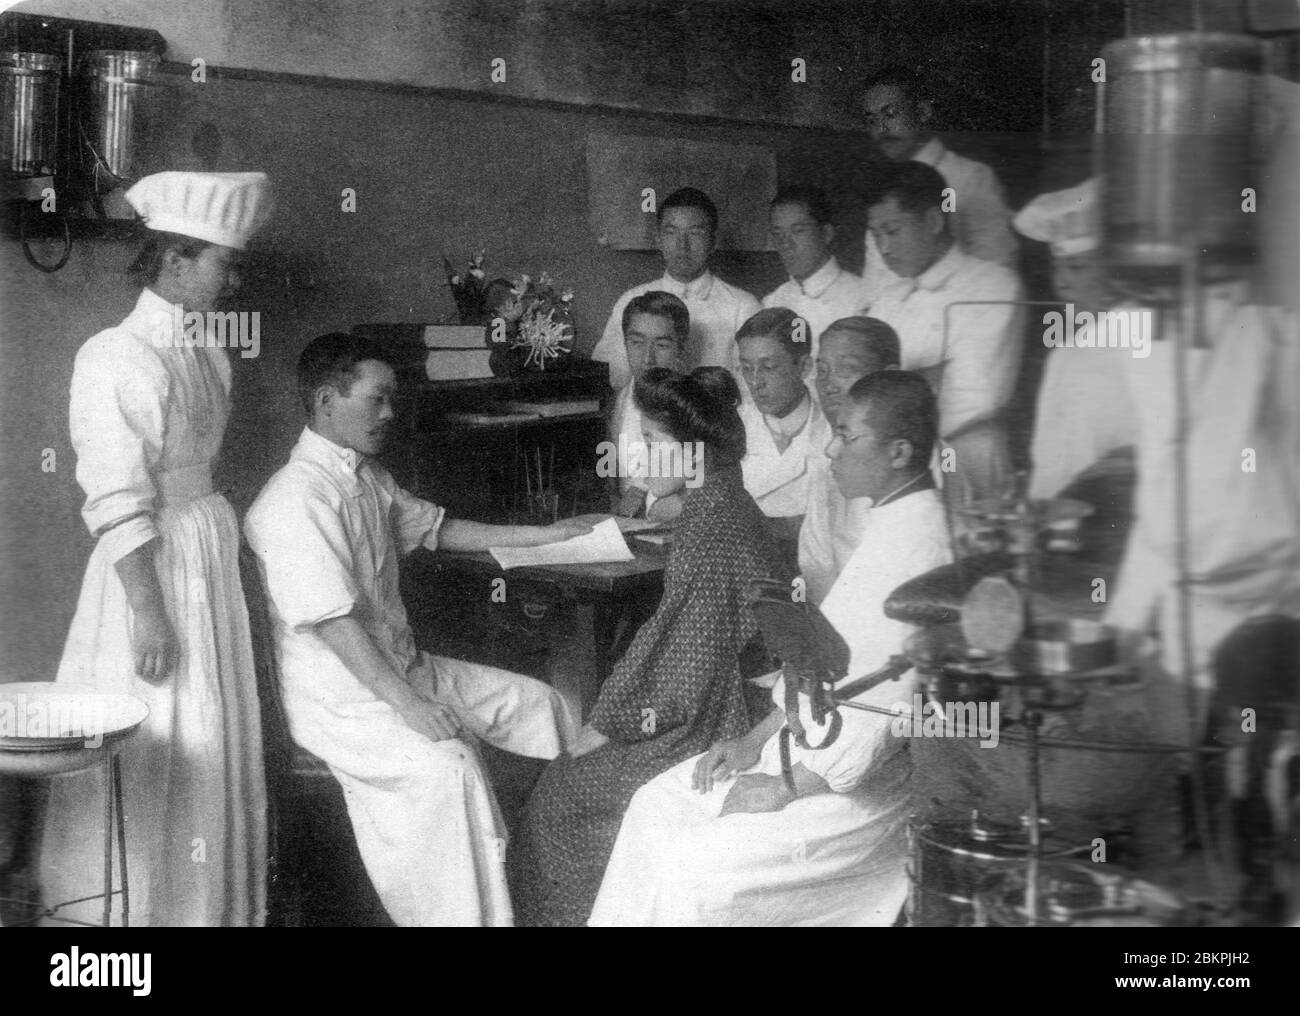 [ 1910s Japan - Japanese Doctor and Patient ] —   Doctors-to-be and nurses attend to a patient at Okayama Iigakku Senmon Gakko, a medical school in Okayama, in 1910 (Meiji 34).  20th century vintage gelatin silver print. Stock Photo